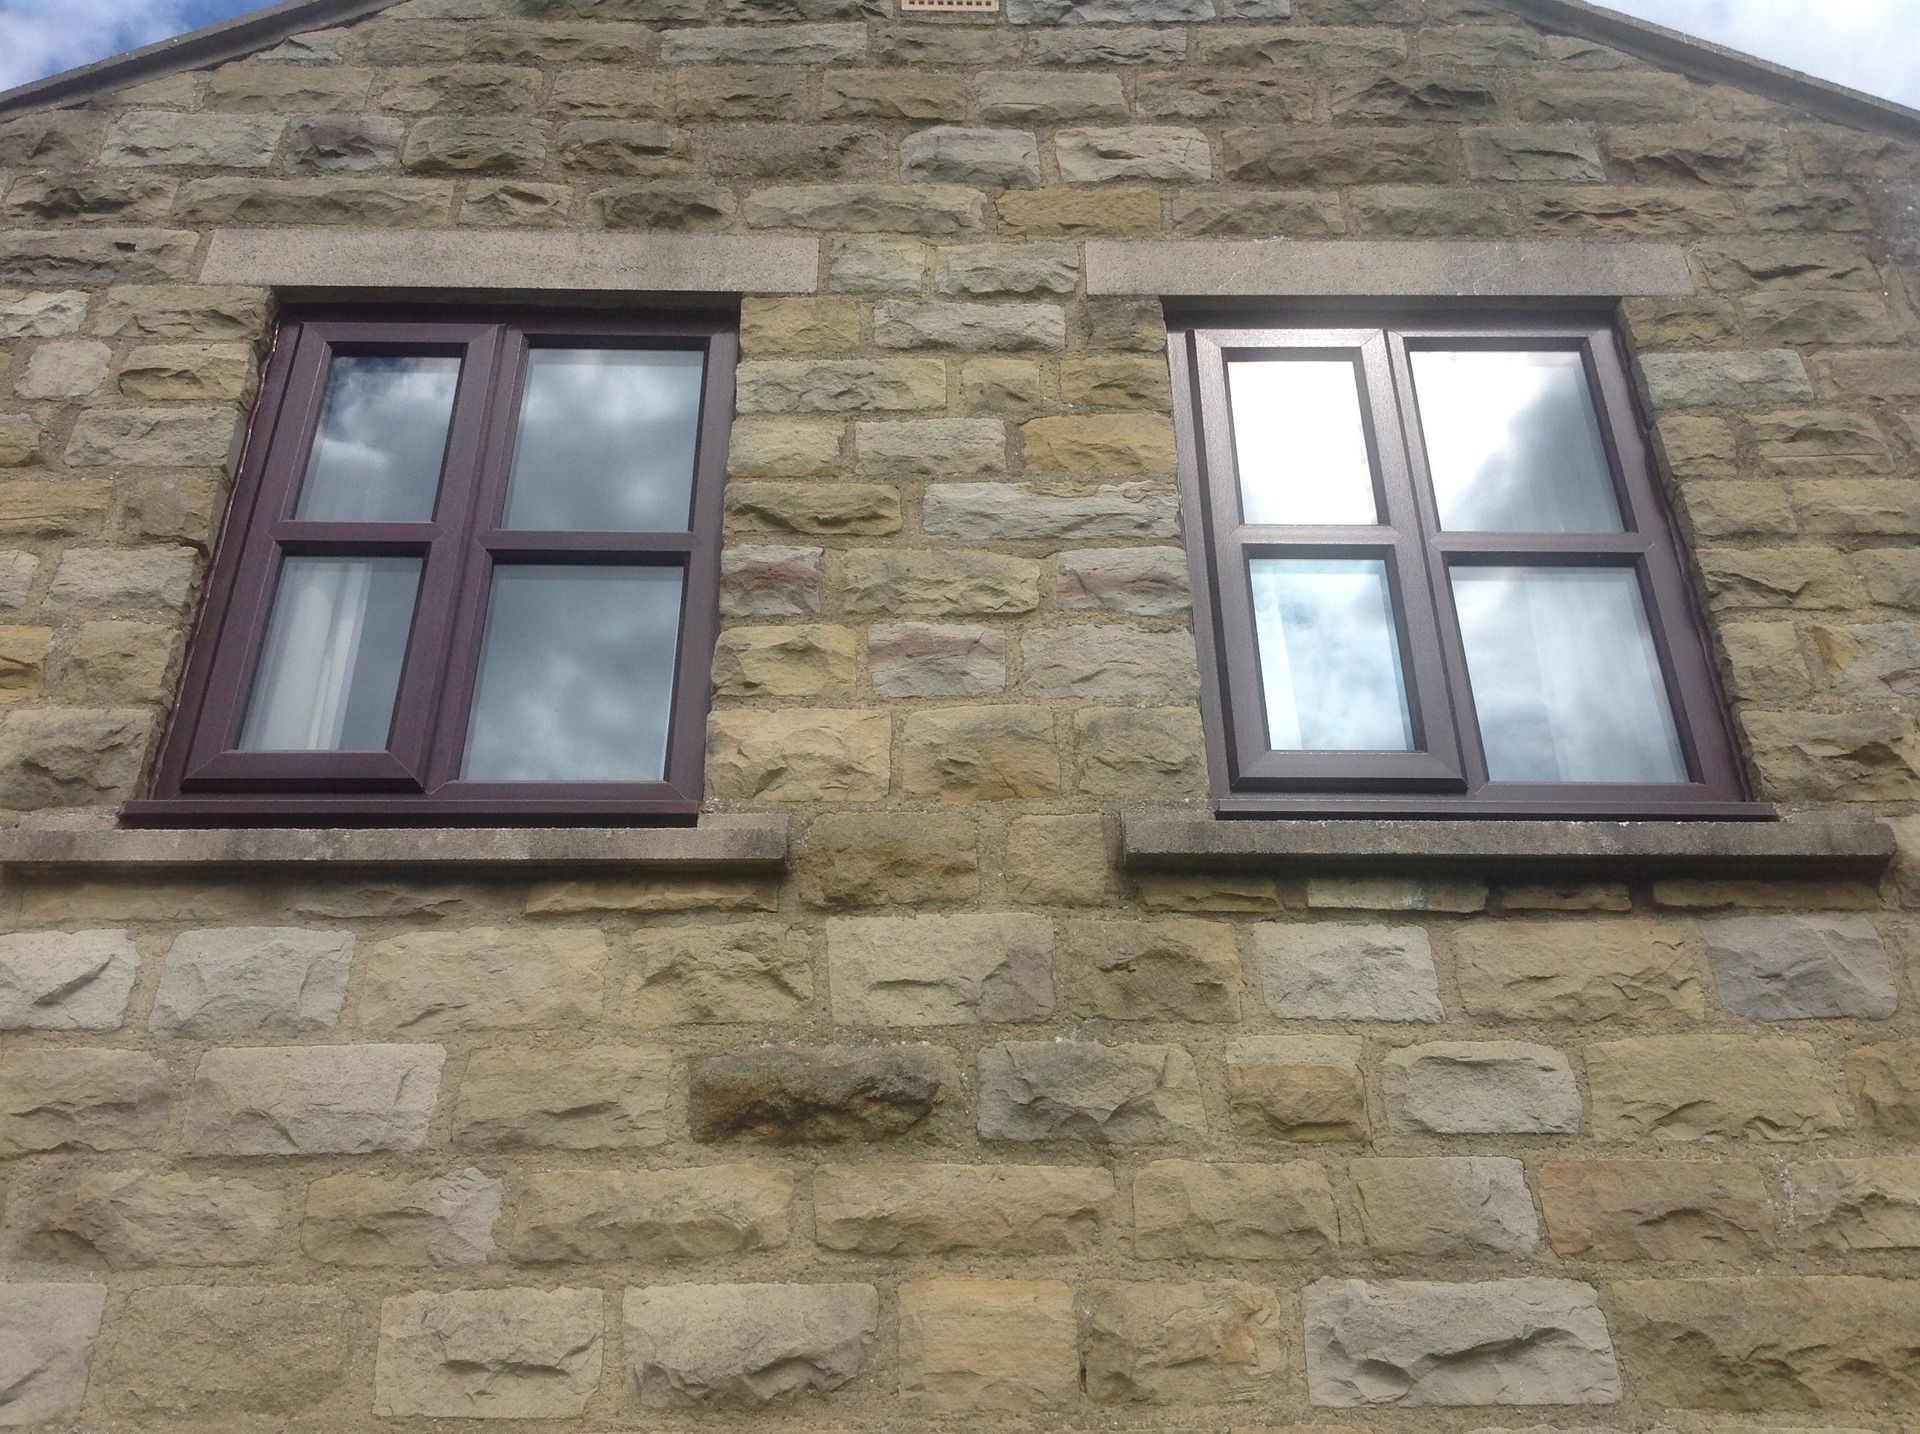 view of installed windows from bottom